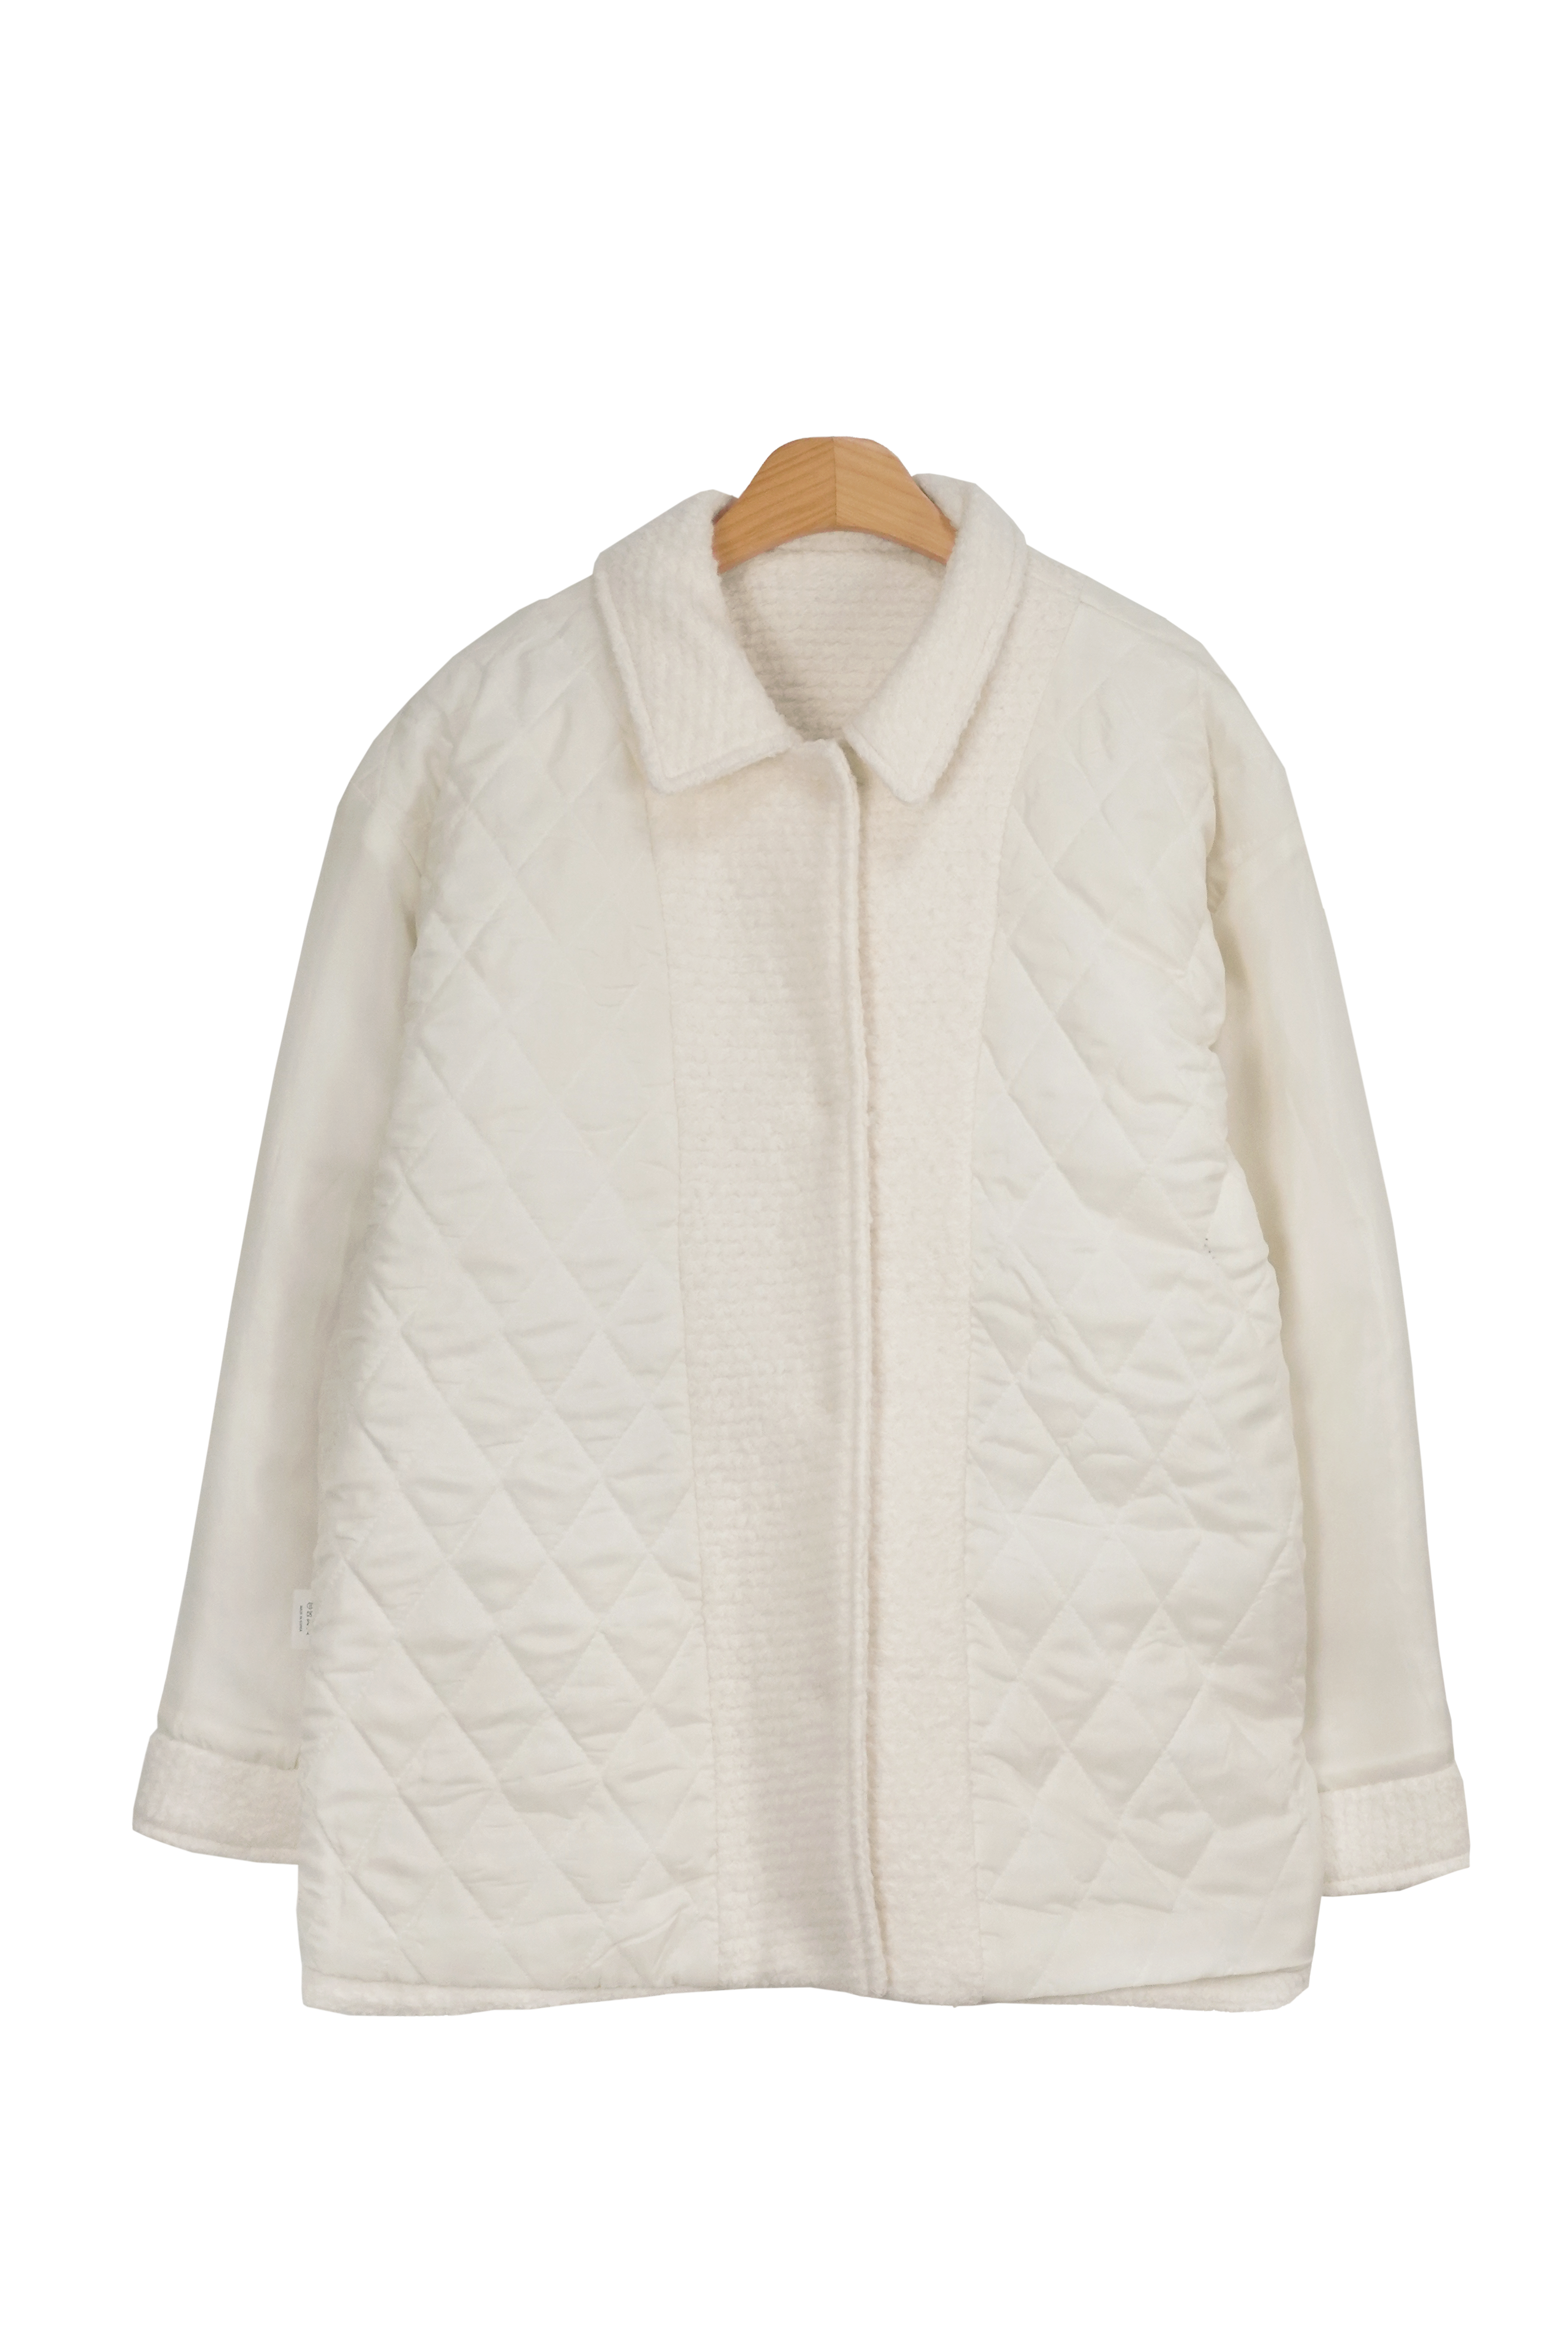 (Quilted Lining) Haihm wool faux fur bookle jacket Quilting Winter Half Coat (2 colors)